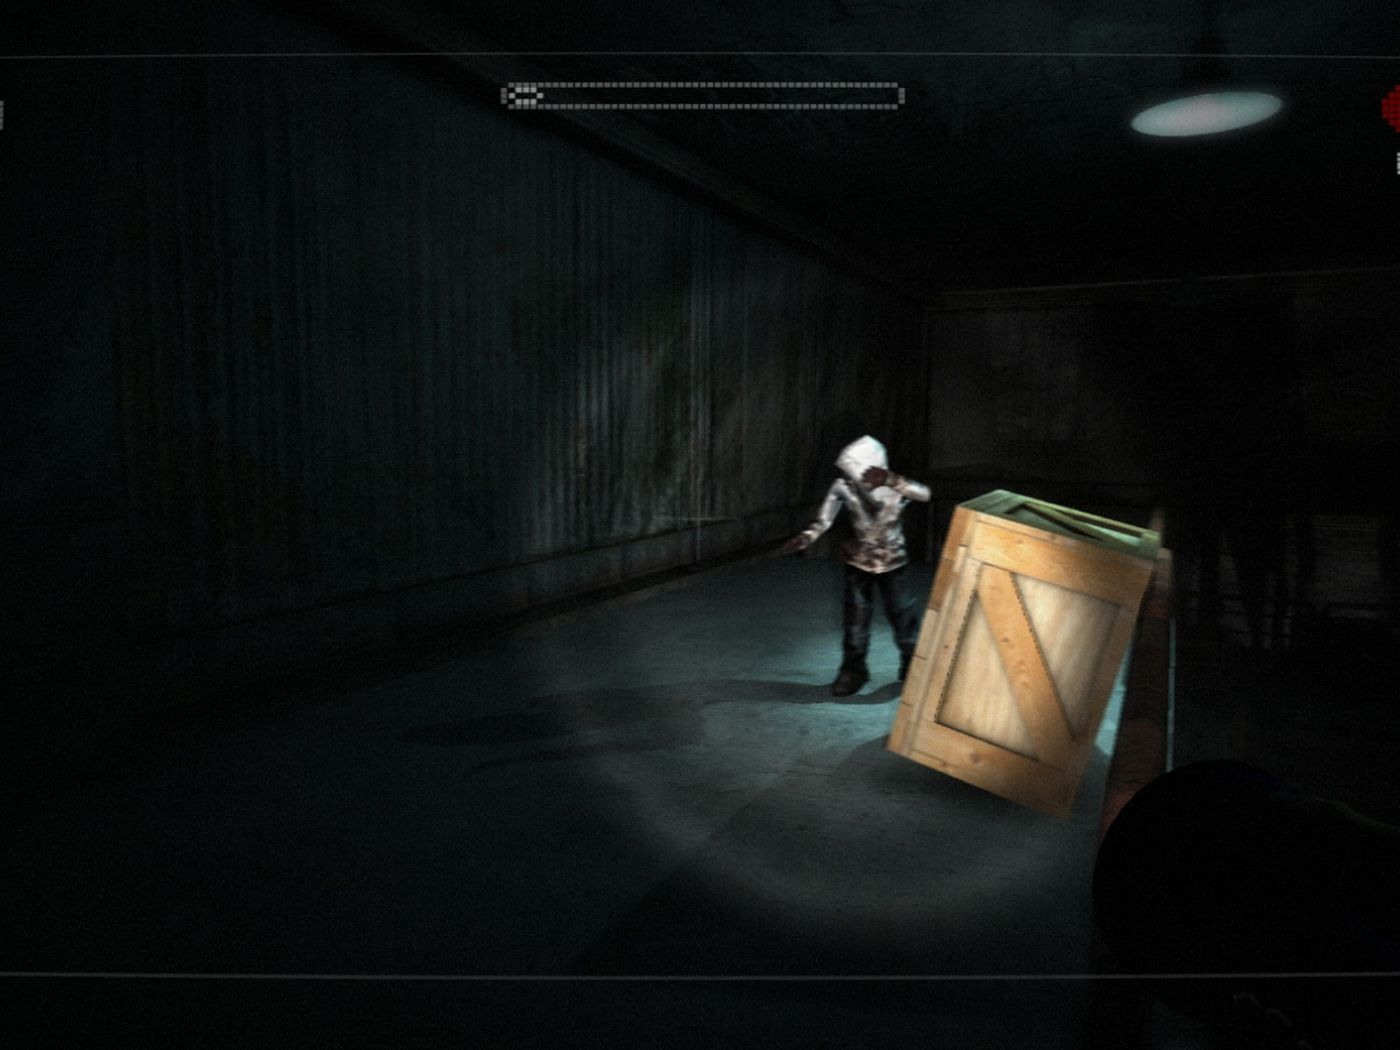 Slender: The Arrival launching Oct. 28 on Steam, consoles in 2014